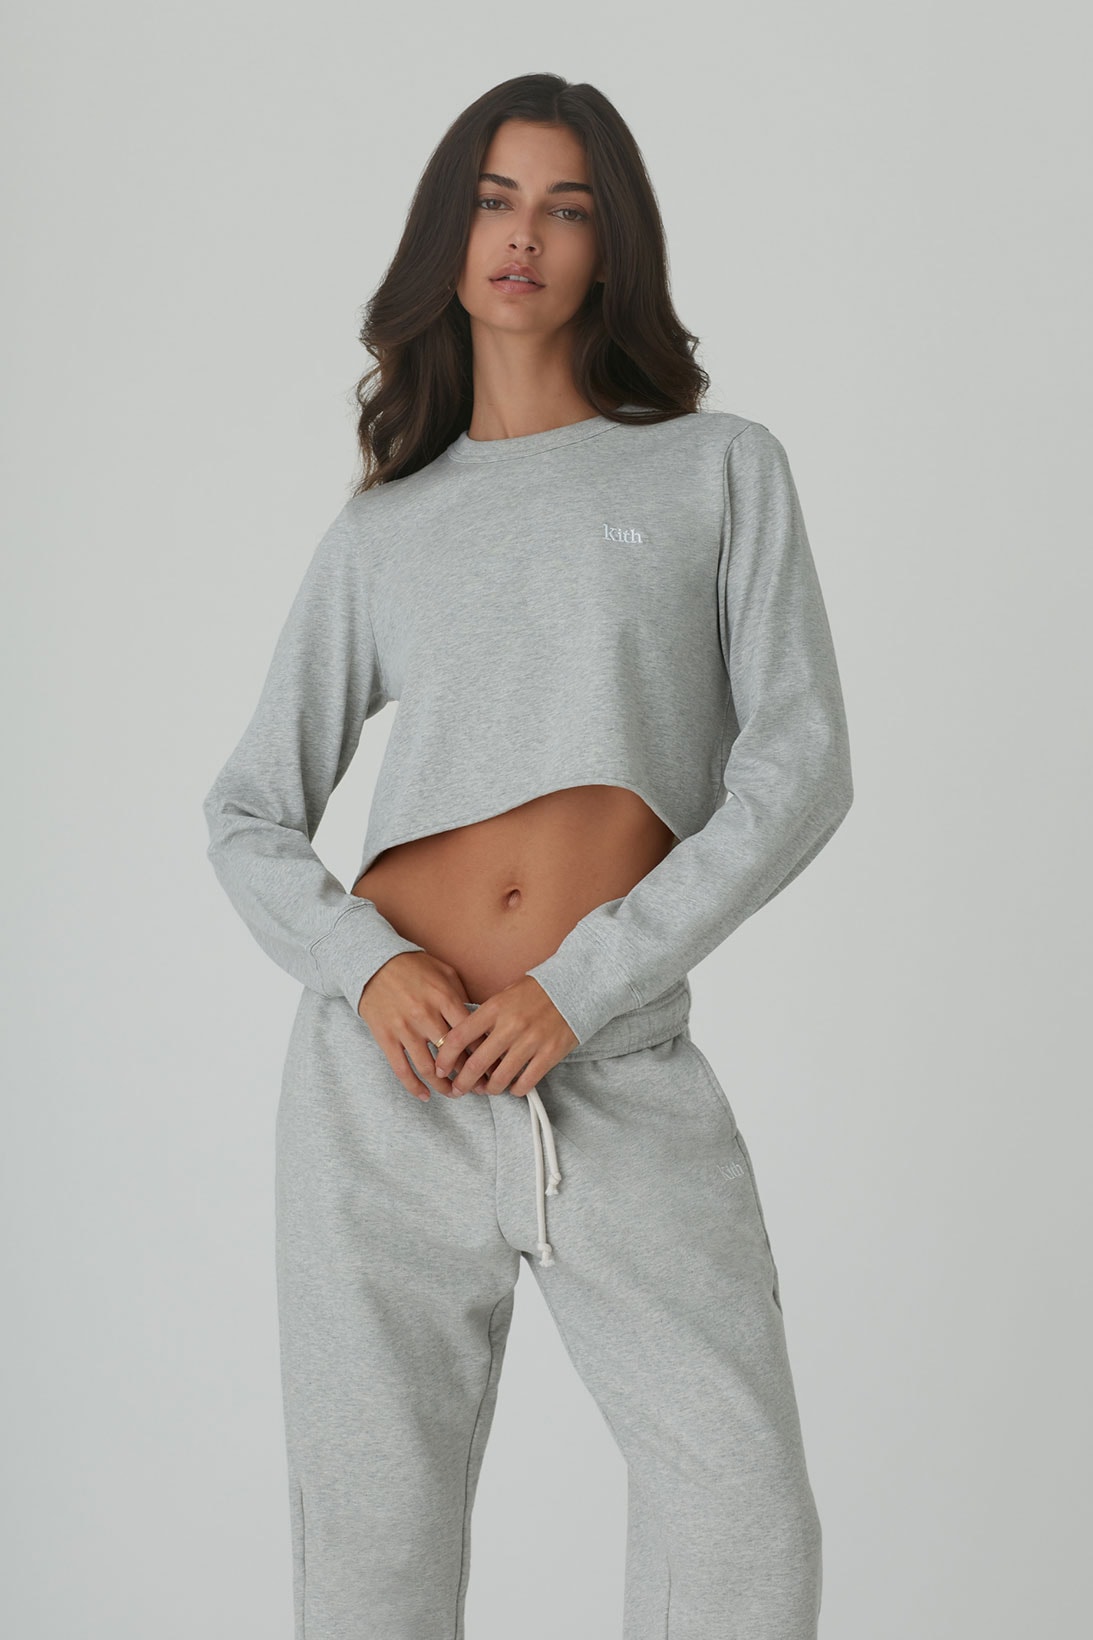 kith women spring 2021 collection cropped tee pants jogger sweats